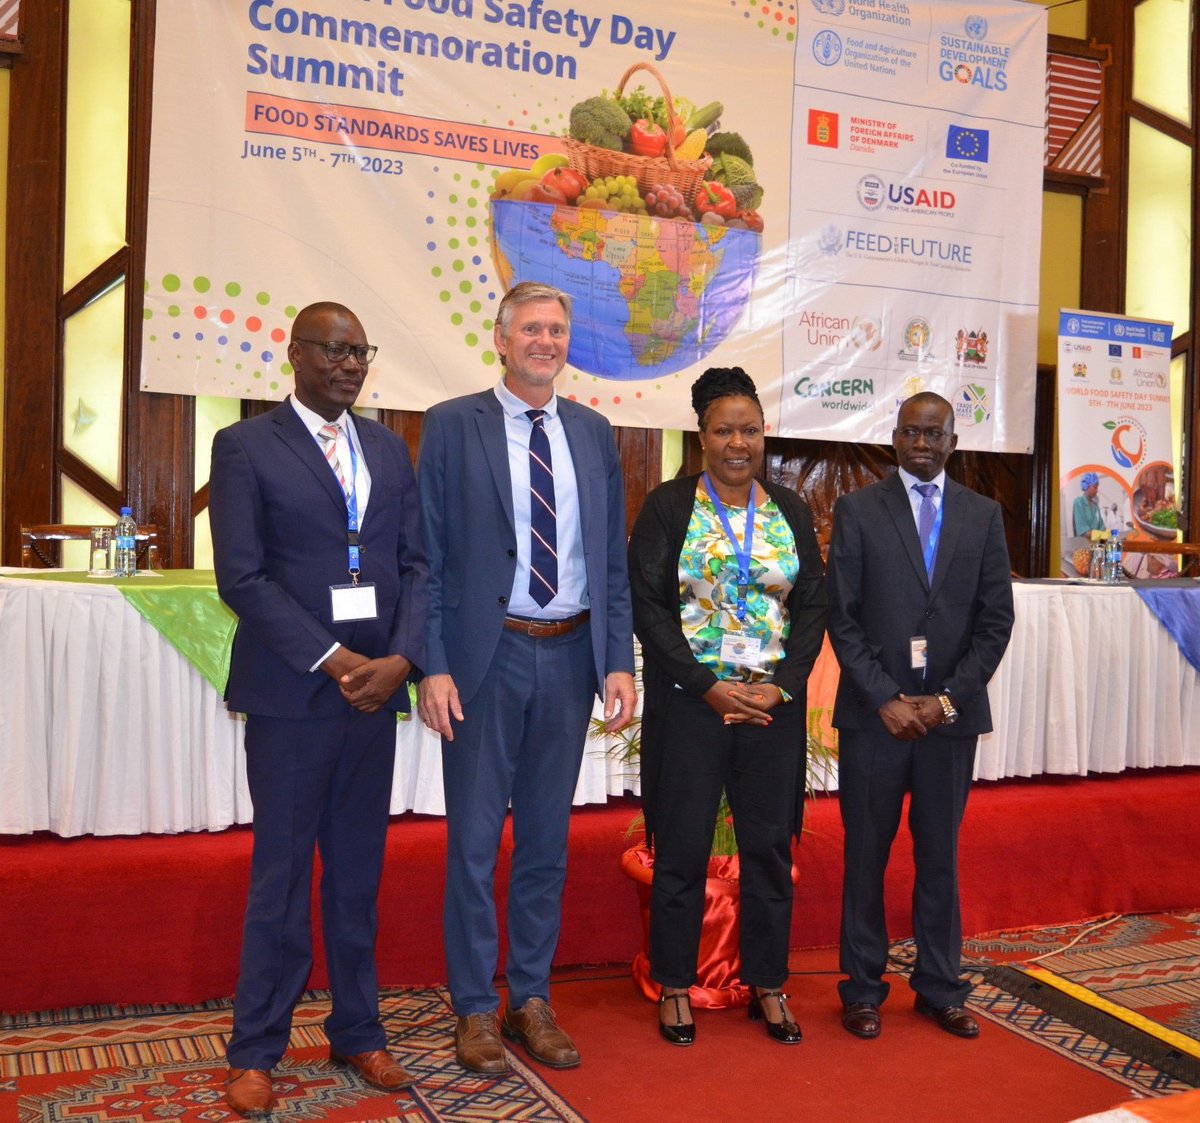 Day 1 of the World Food Safety Day Commemoration Summit was officially opened by H.E. Ole Thonke, Ambassador at the Embassy of Denmark in Kenya. #foodsafety #foodsafetyculture #worldfoodsafetyday2023